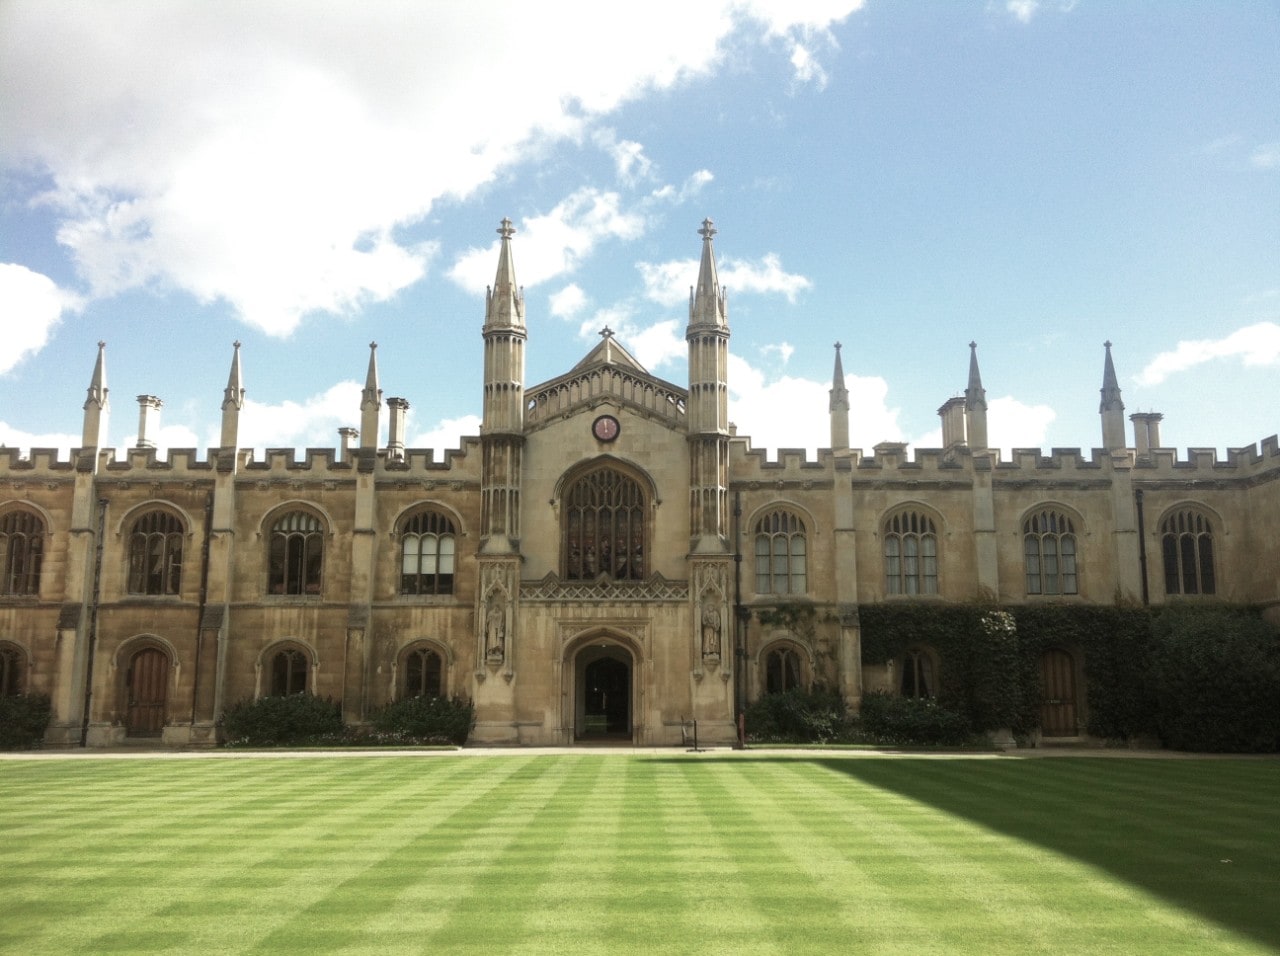 The University of Cambridge campus where Mitchell studied.